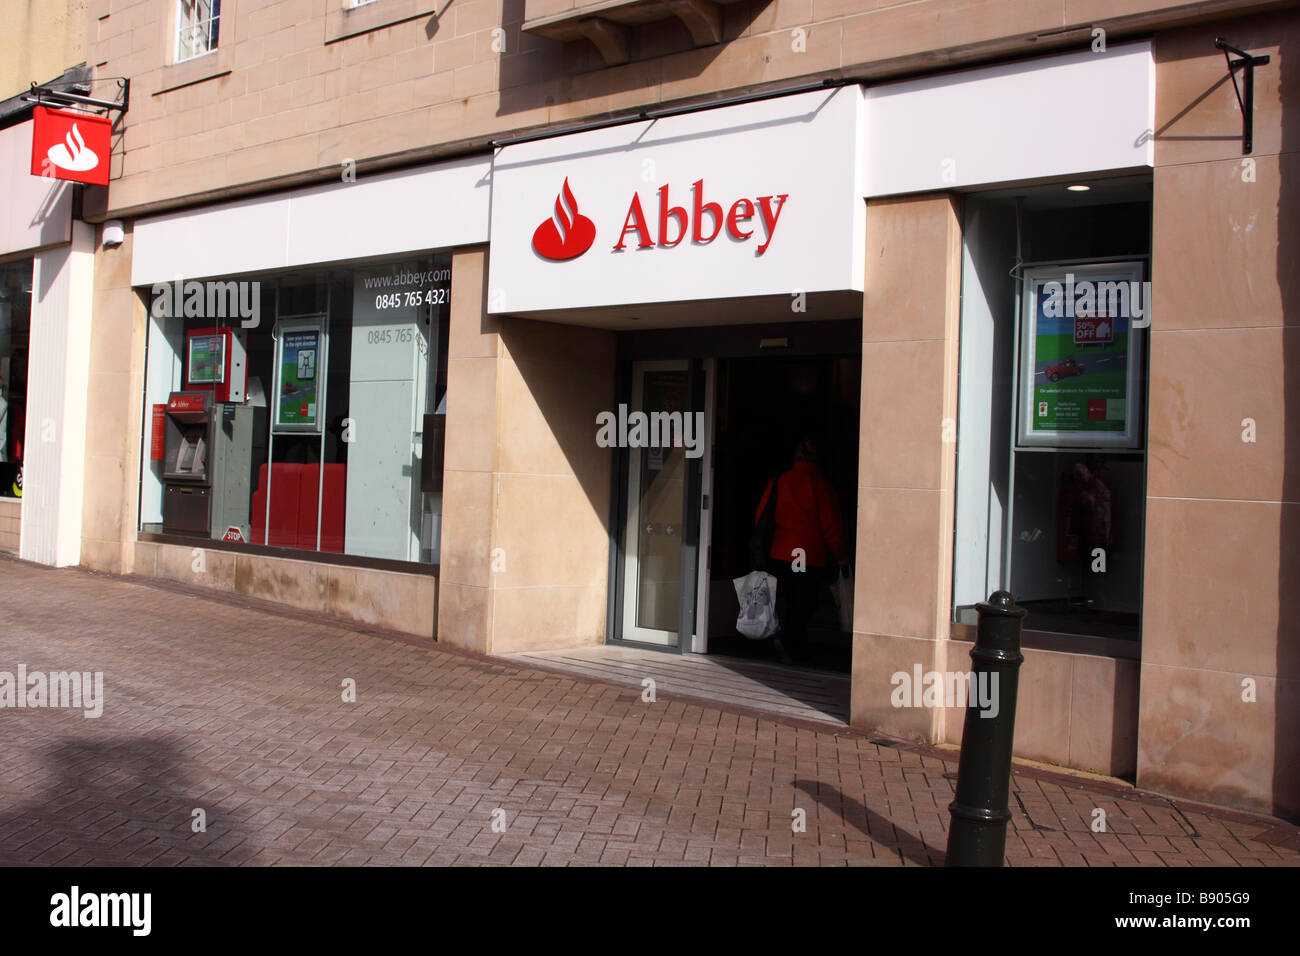 abbey national building society bank santander group shop front mansfield Stock Photo